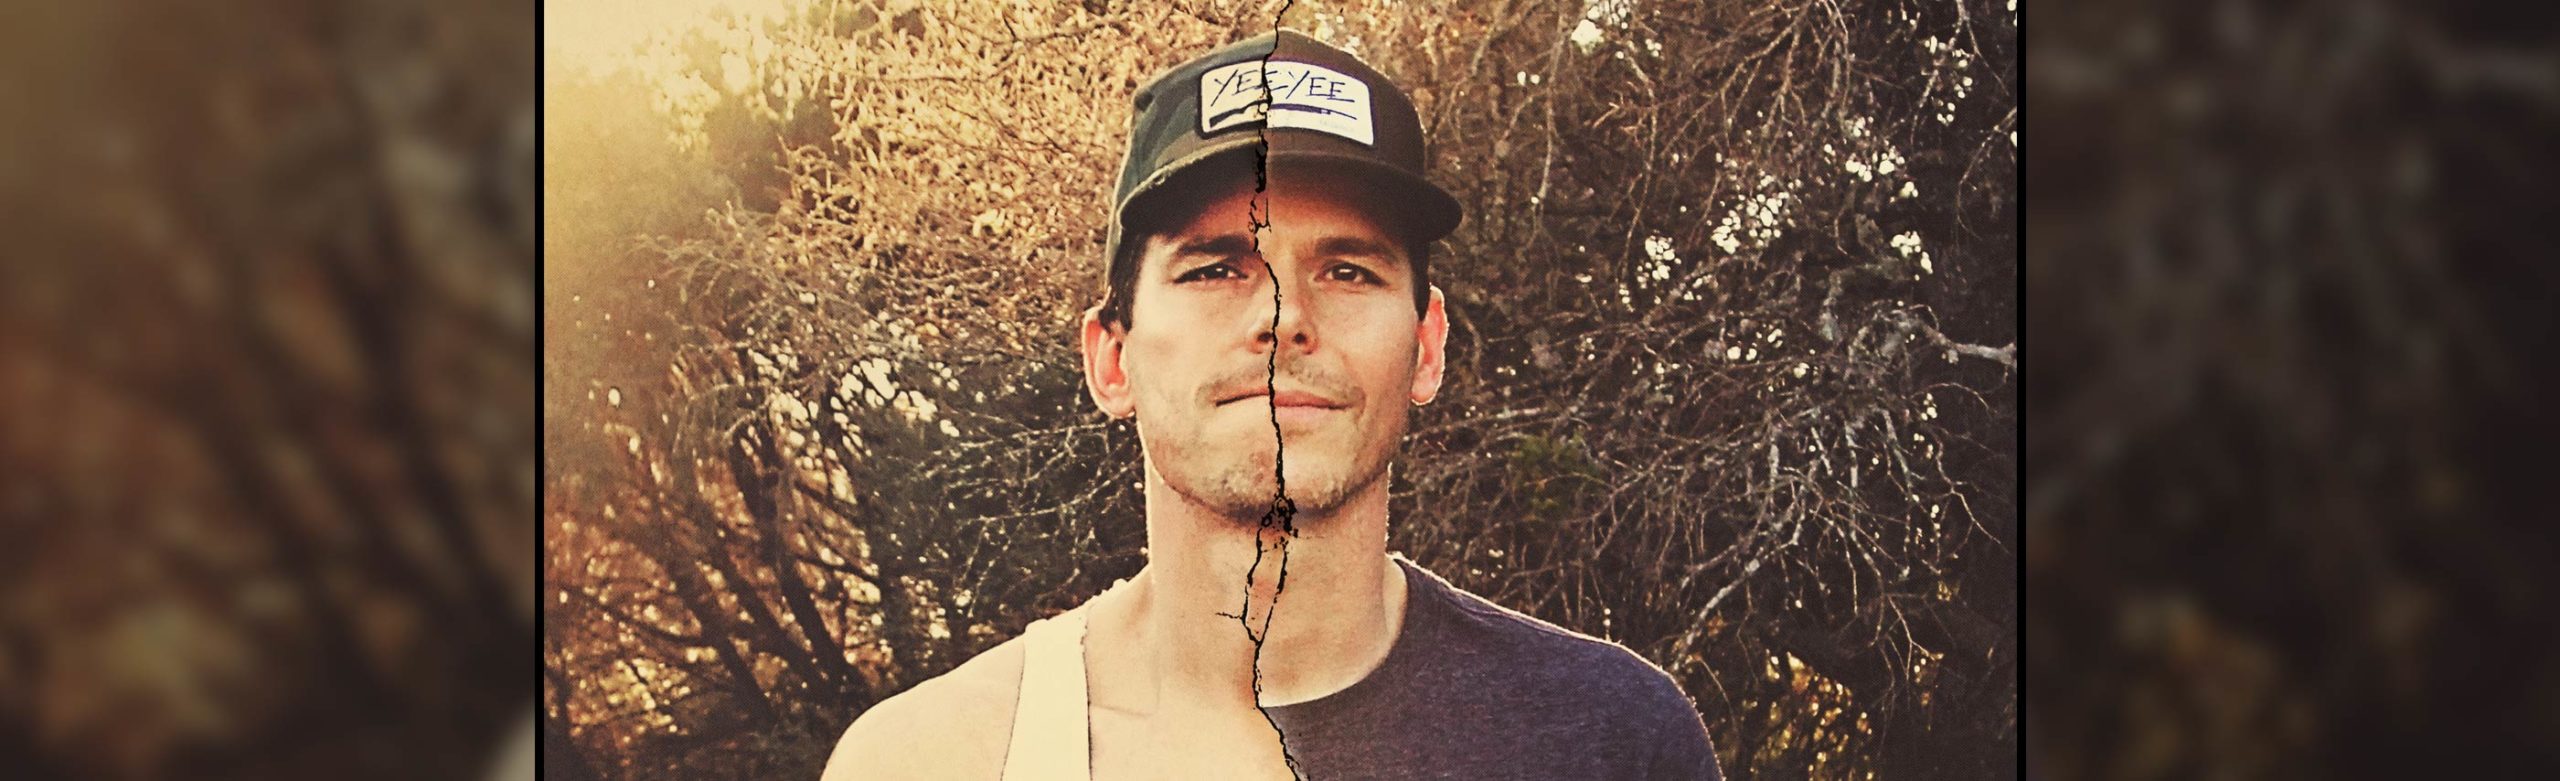 Granger Smith ft. Earl Dibbles Jr. Tickets and Autographed Poster Giveaway 2022 Image